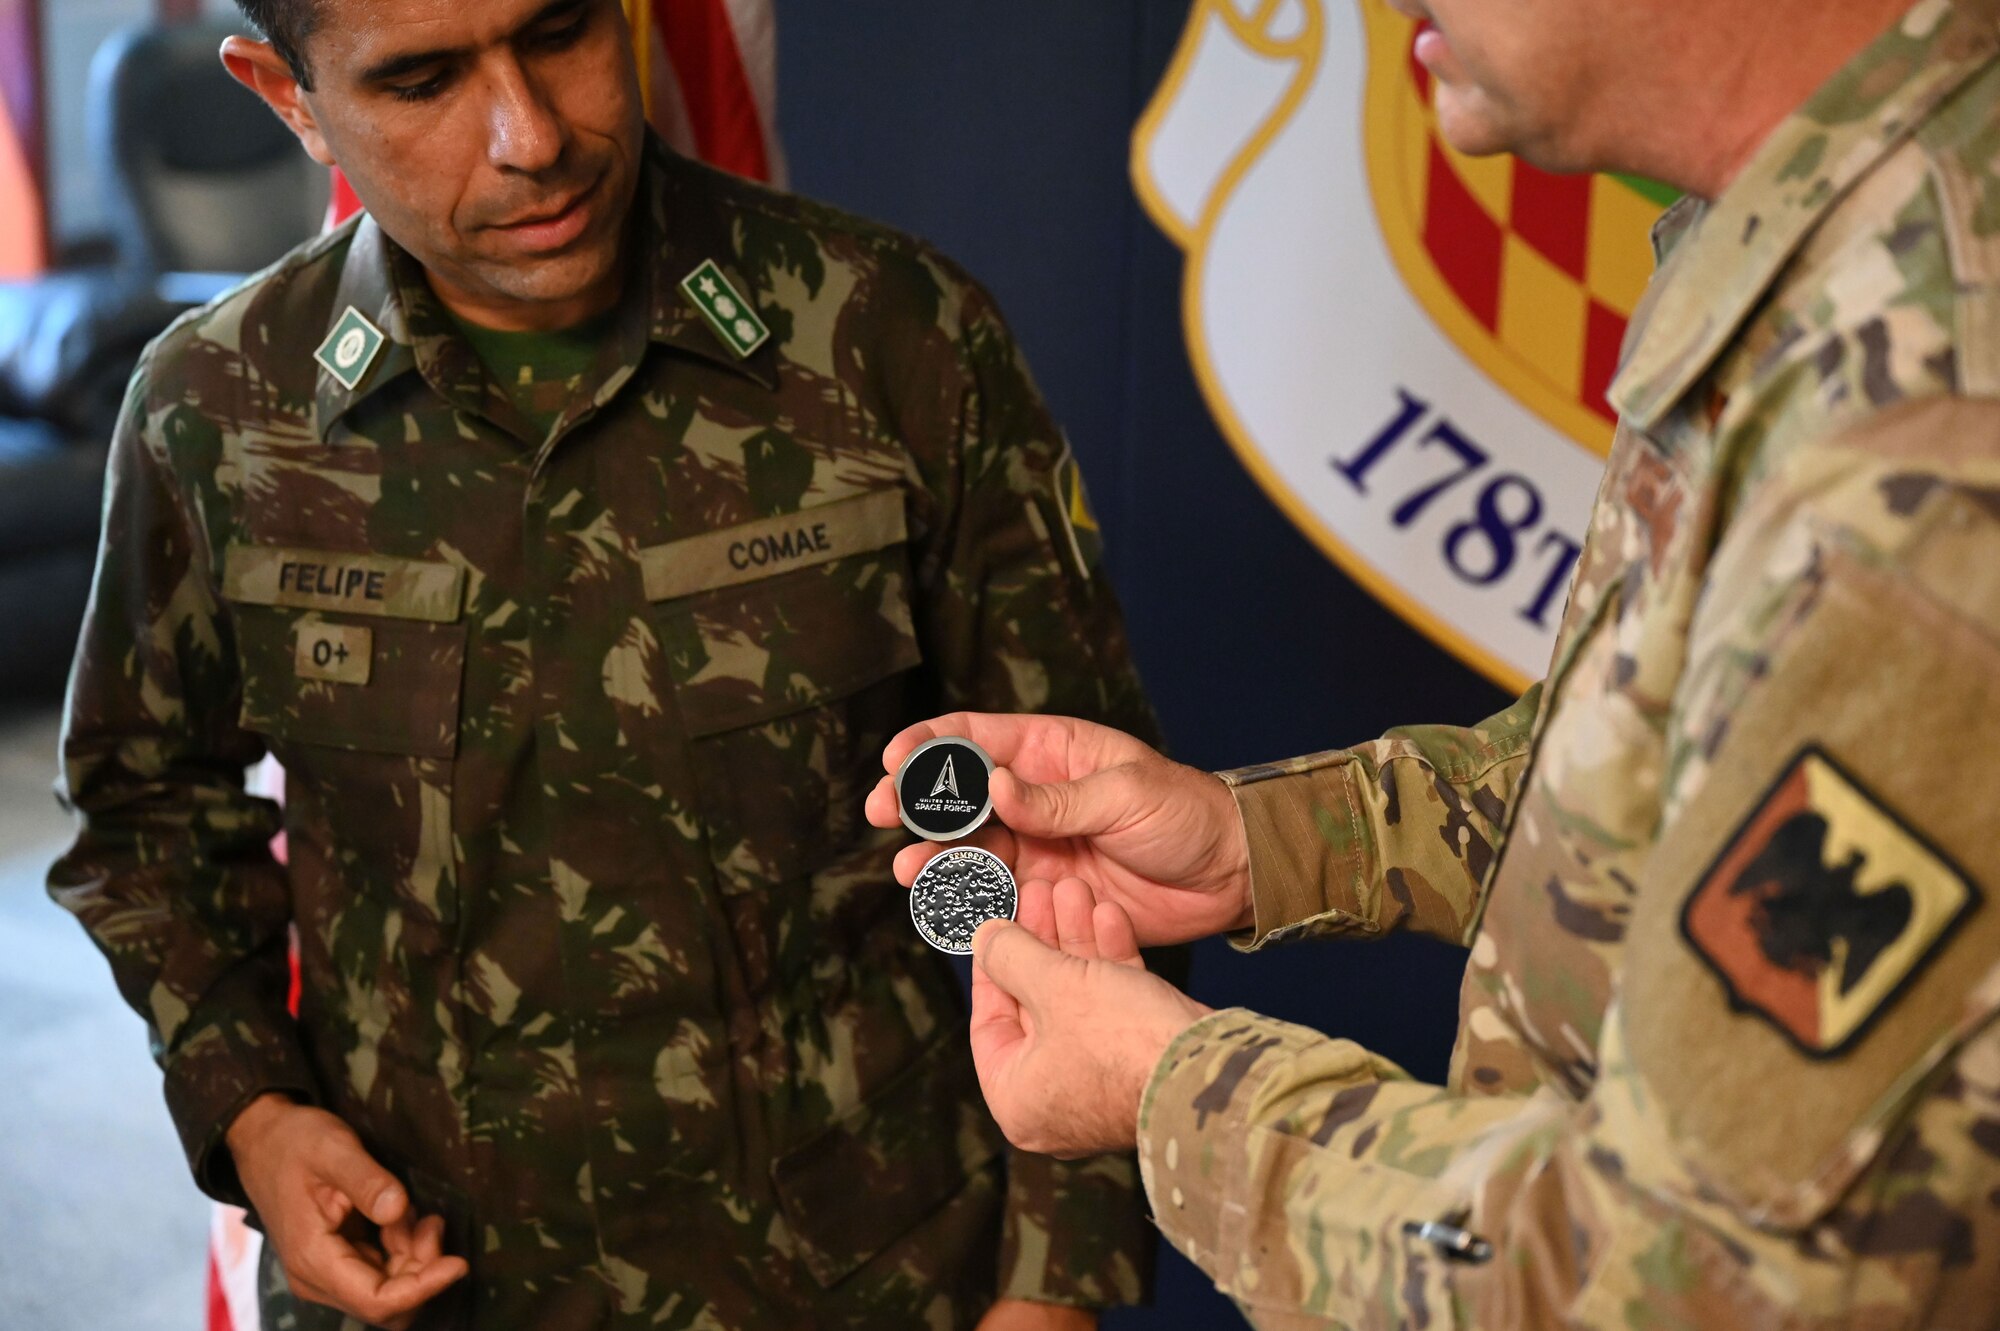 Major General Vaughan presents coins to the brazilian military members participating in the Vulcan Guard exercise.